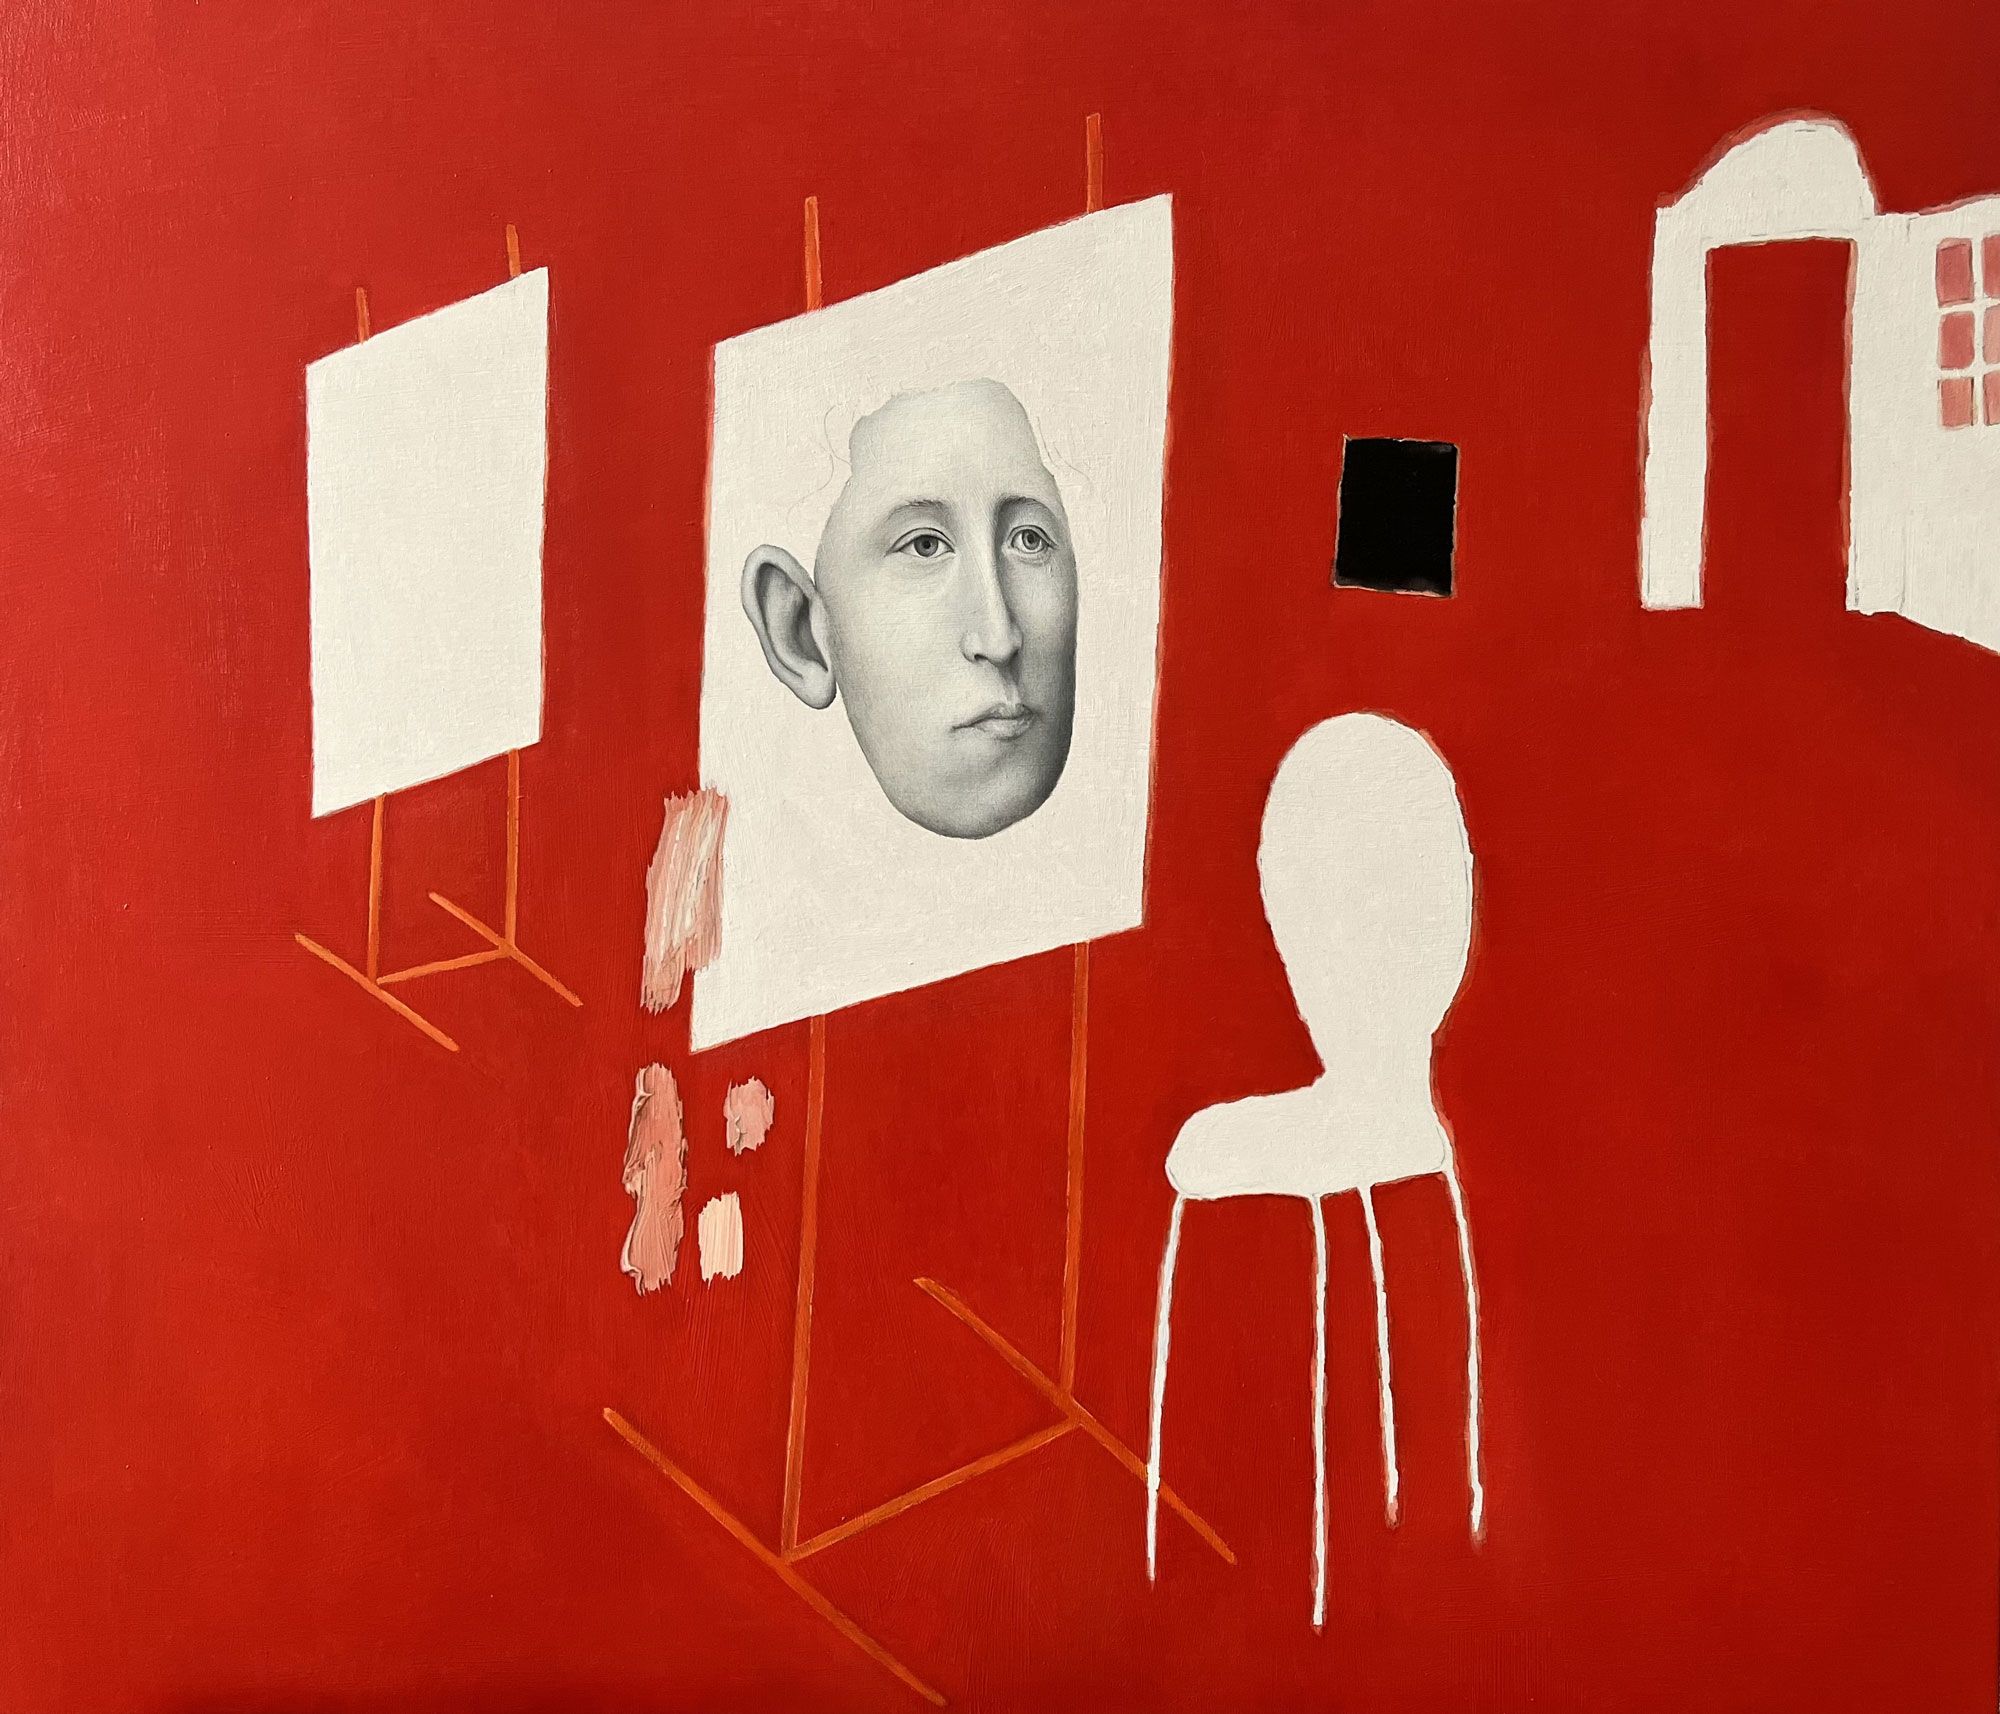 Empty white chair in front of artist's easel on which a pencil drawing of face is in progress.